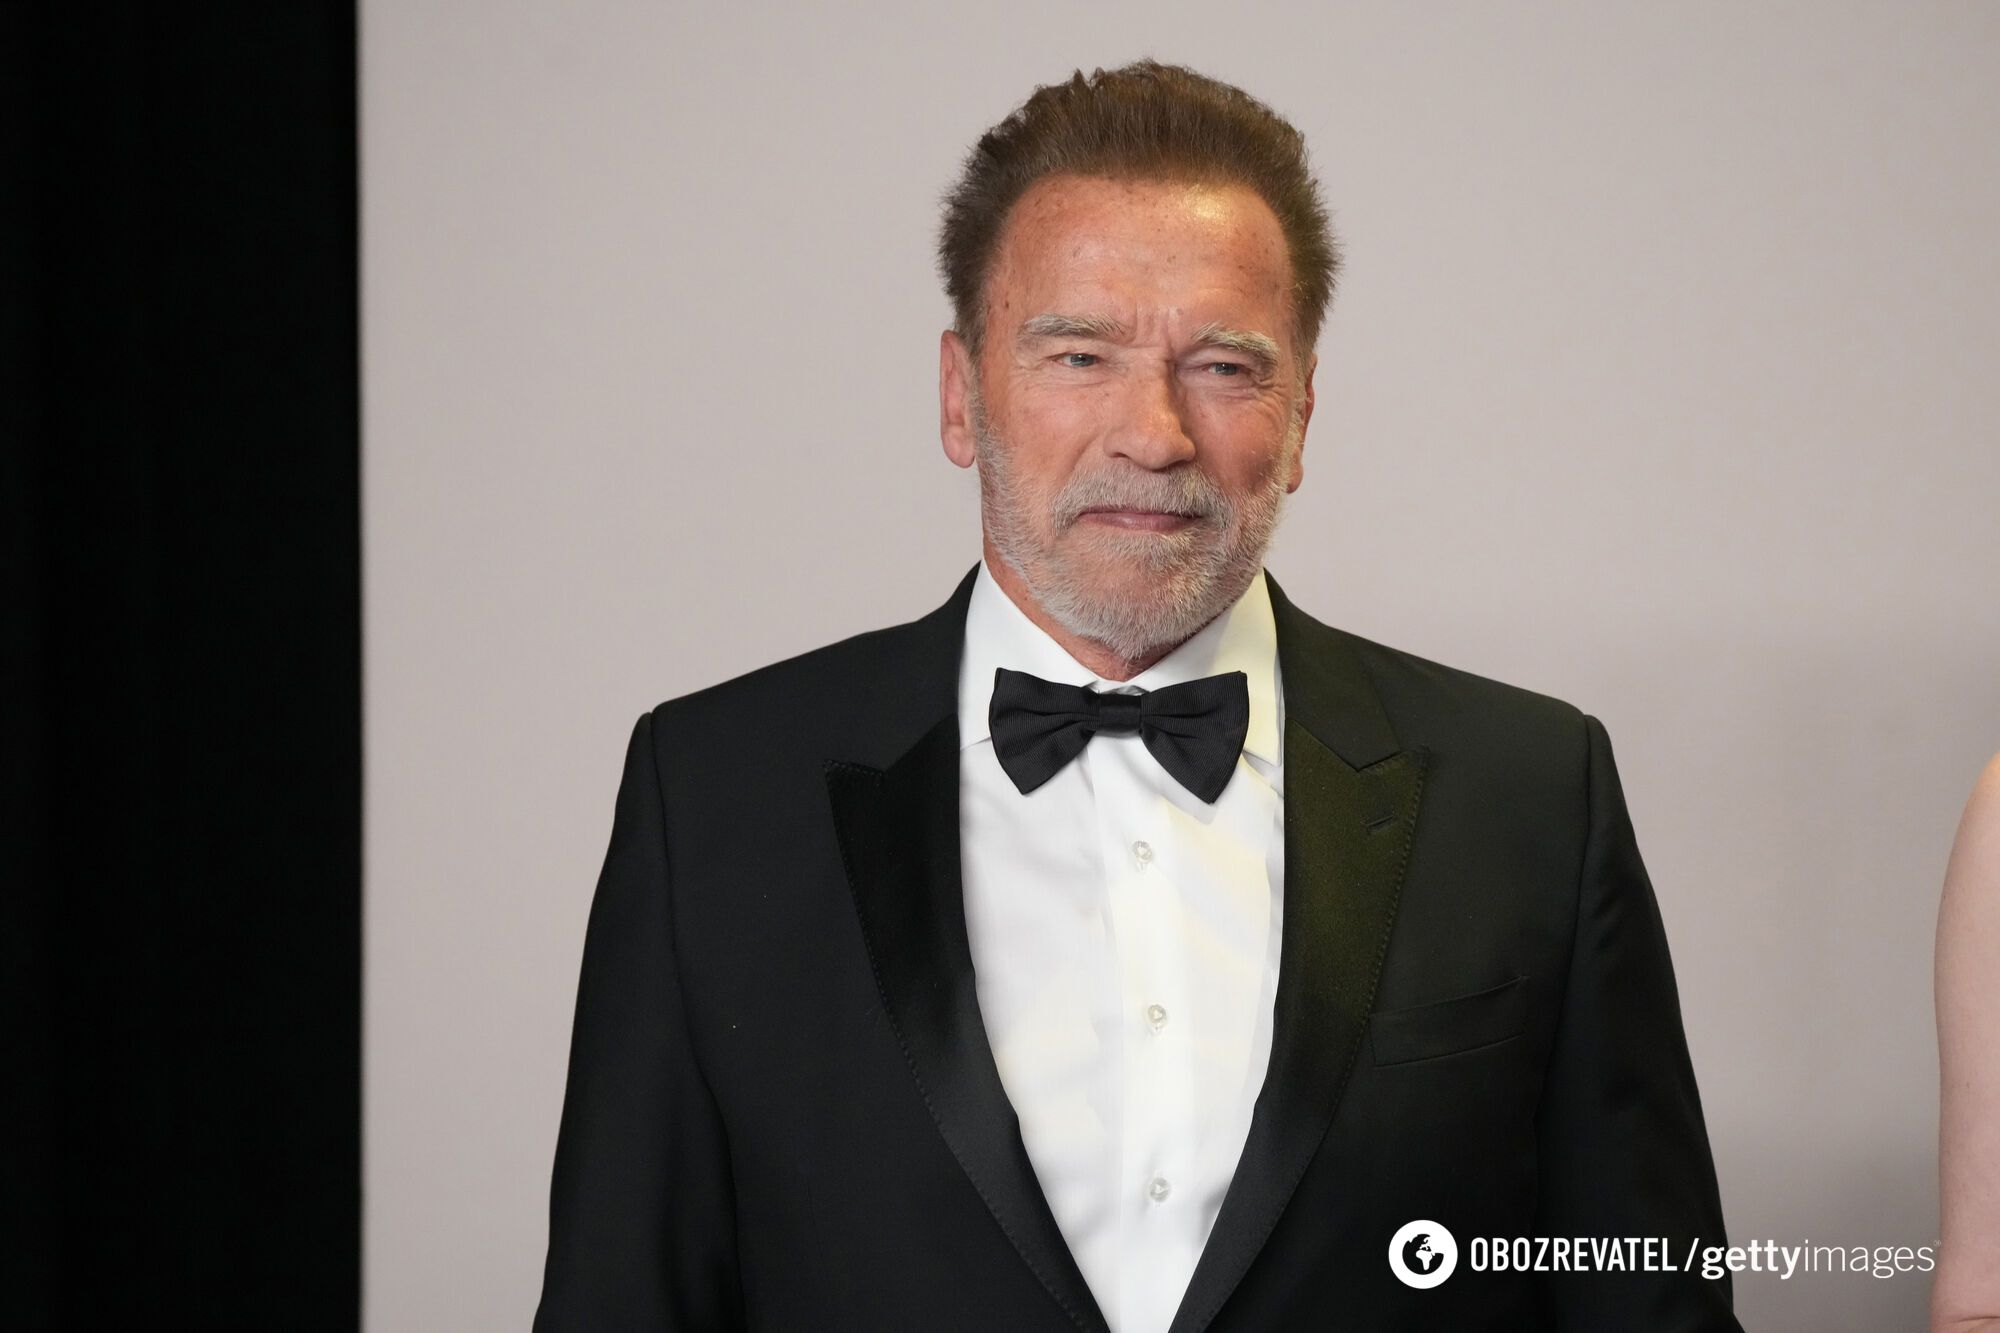 Now like a real Terminator. Arnold Schwarzenegger has a pacemaker after three open heart surgeries